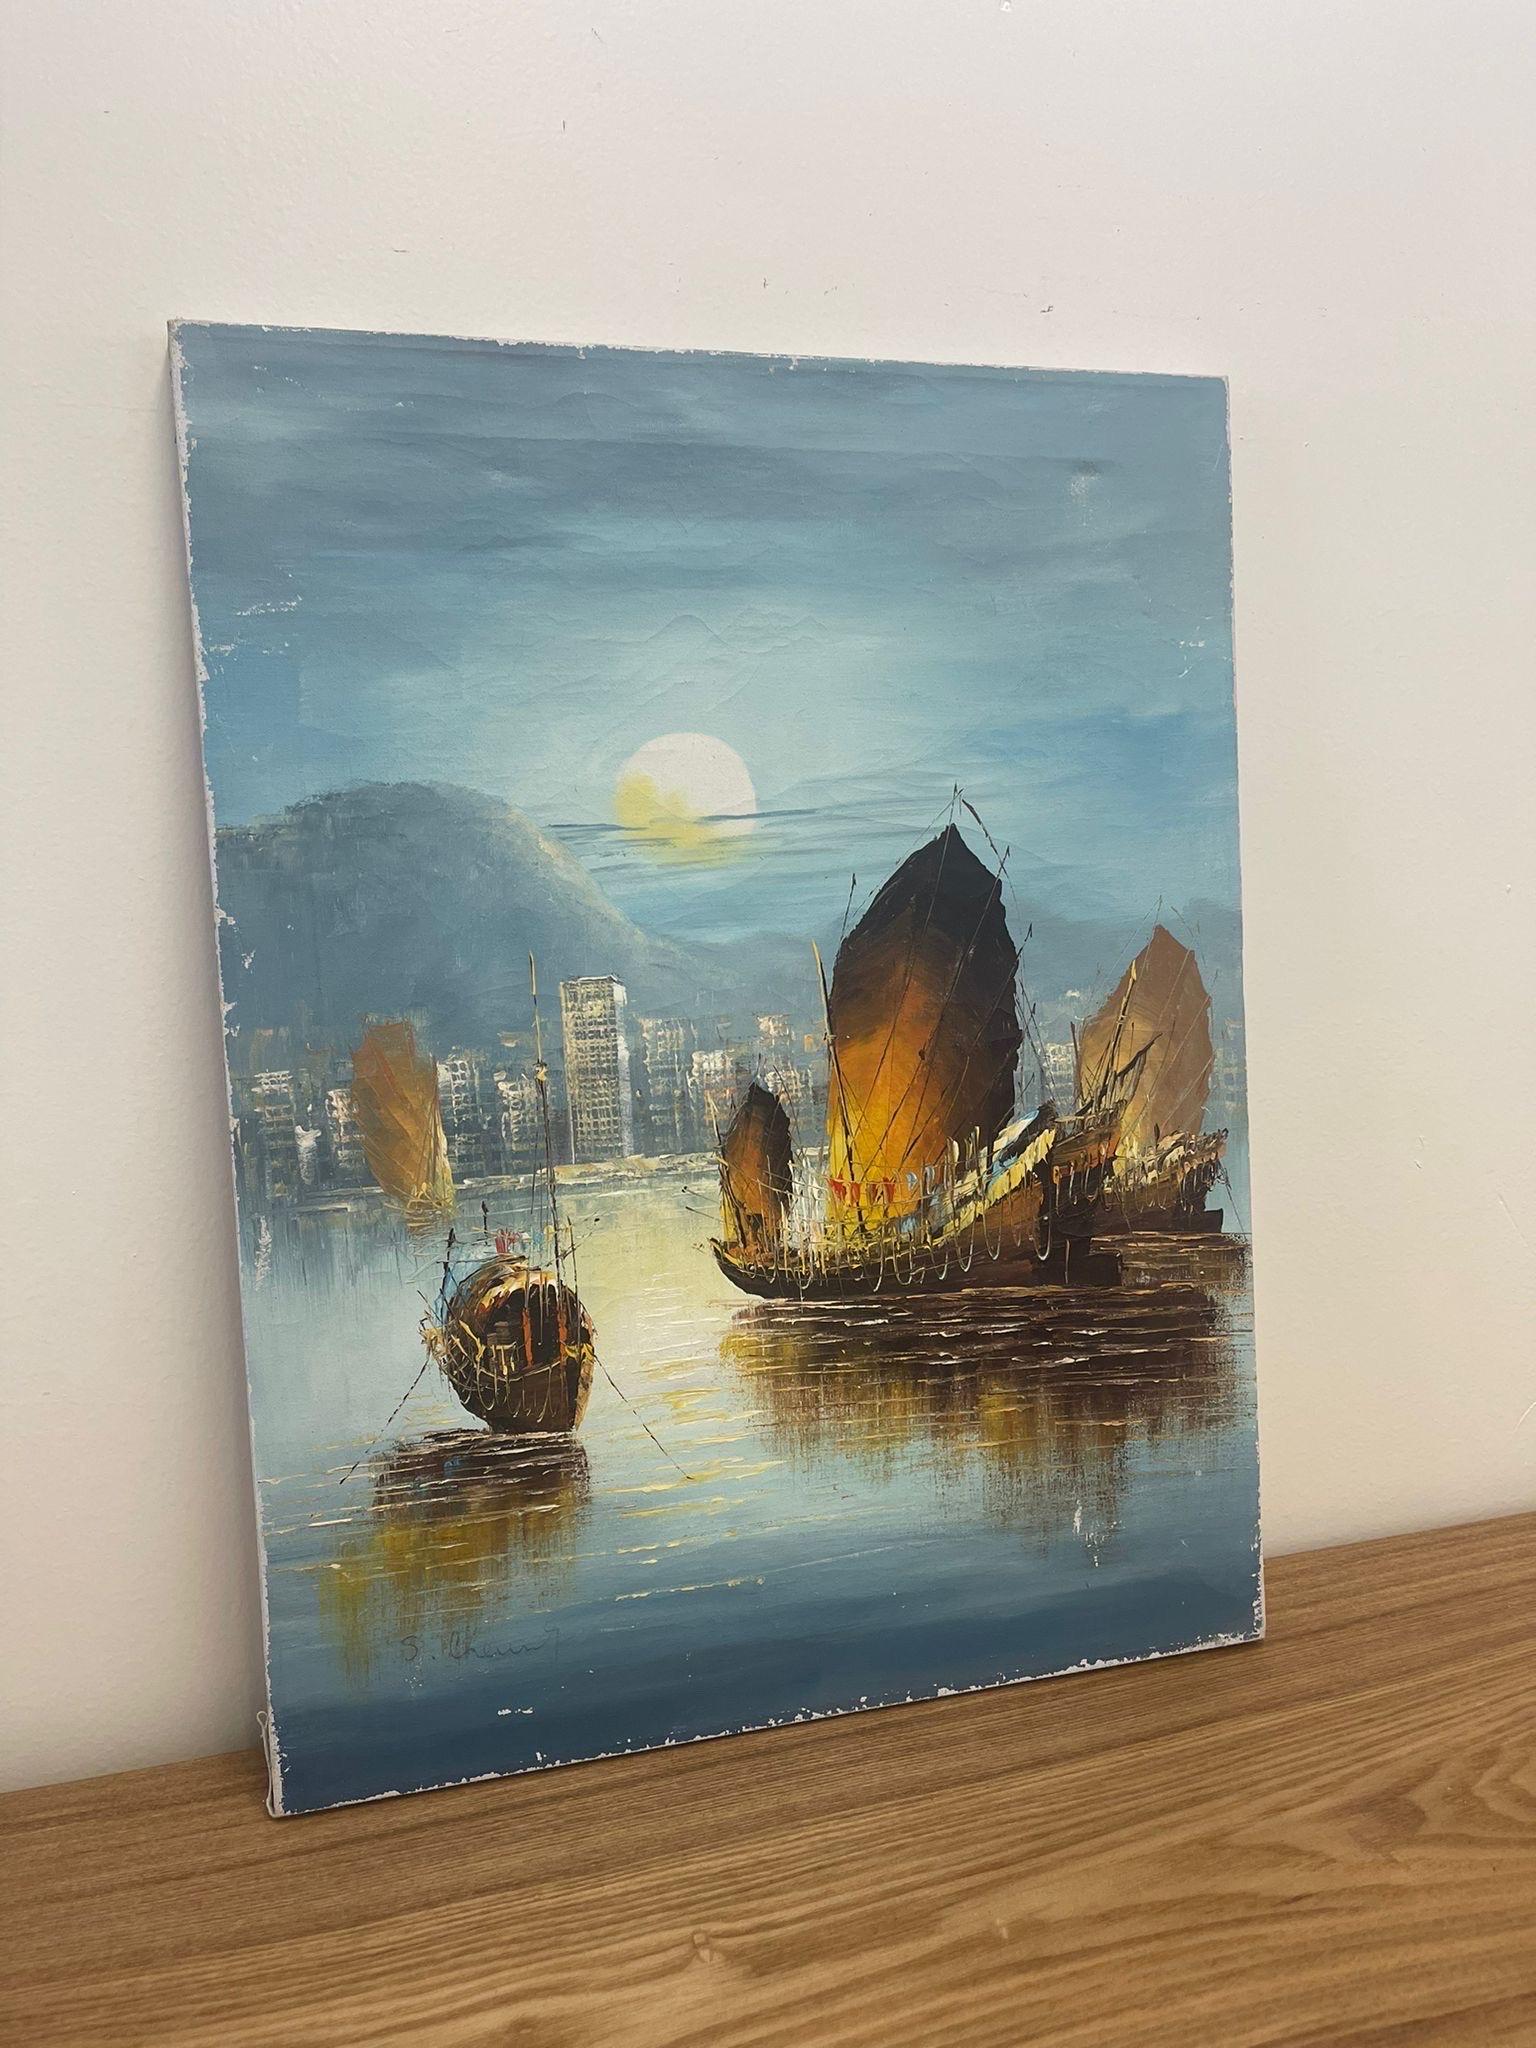 Possibly oil or acrylic painting. Cracking and Patina to the work shows aging. The yellow sailboats are beautifully contrasted by the blue background. Vintage Condition Consistent with Age as Pictured.

Dimensions. 18 1/2 W ; 1/4 D ; 24 H